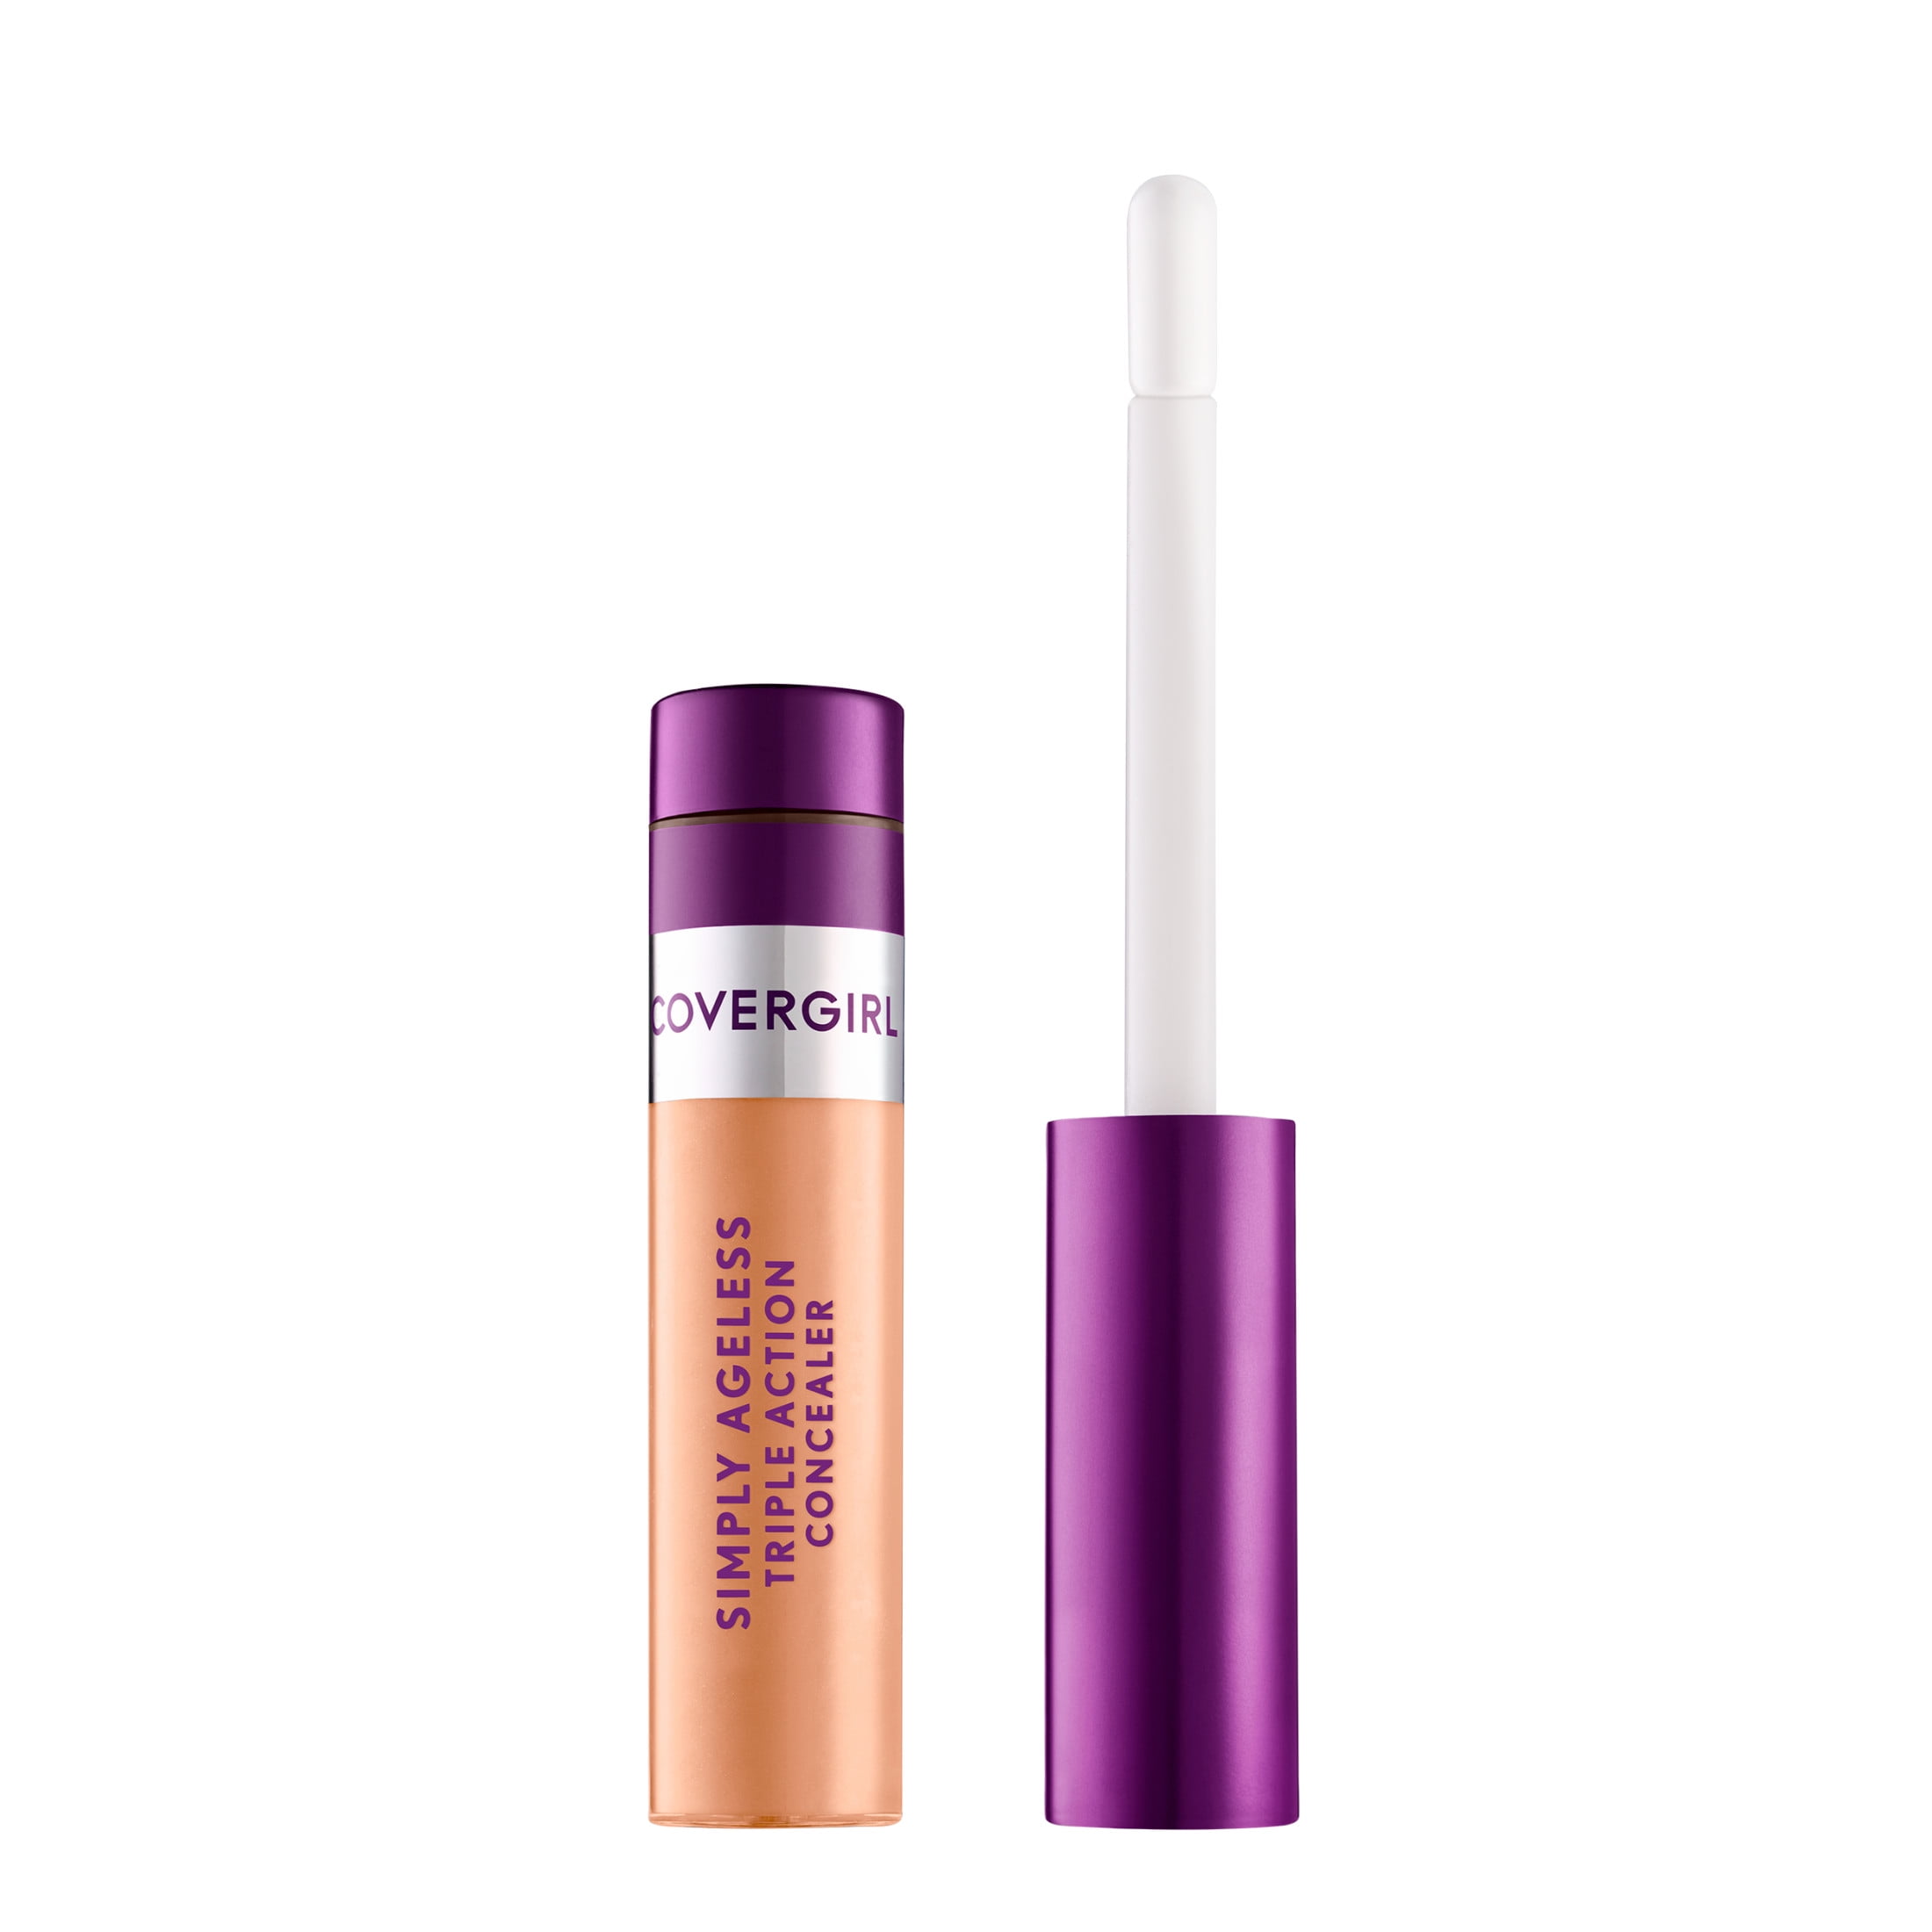 COVERGIRL Simply Ageless Triple Action Concealer, 350 Warm Beige, 0.24 fl  oz